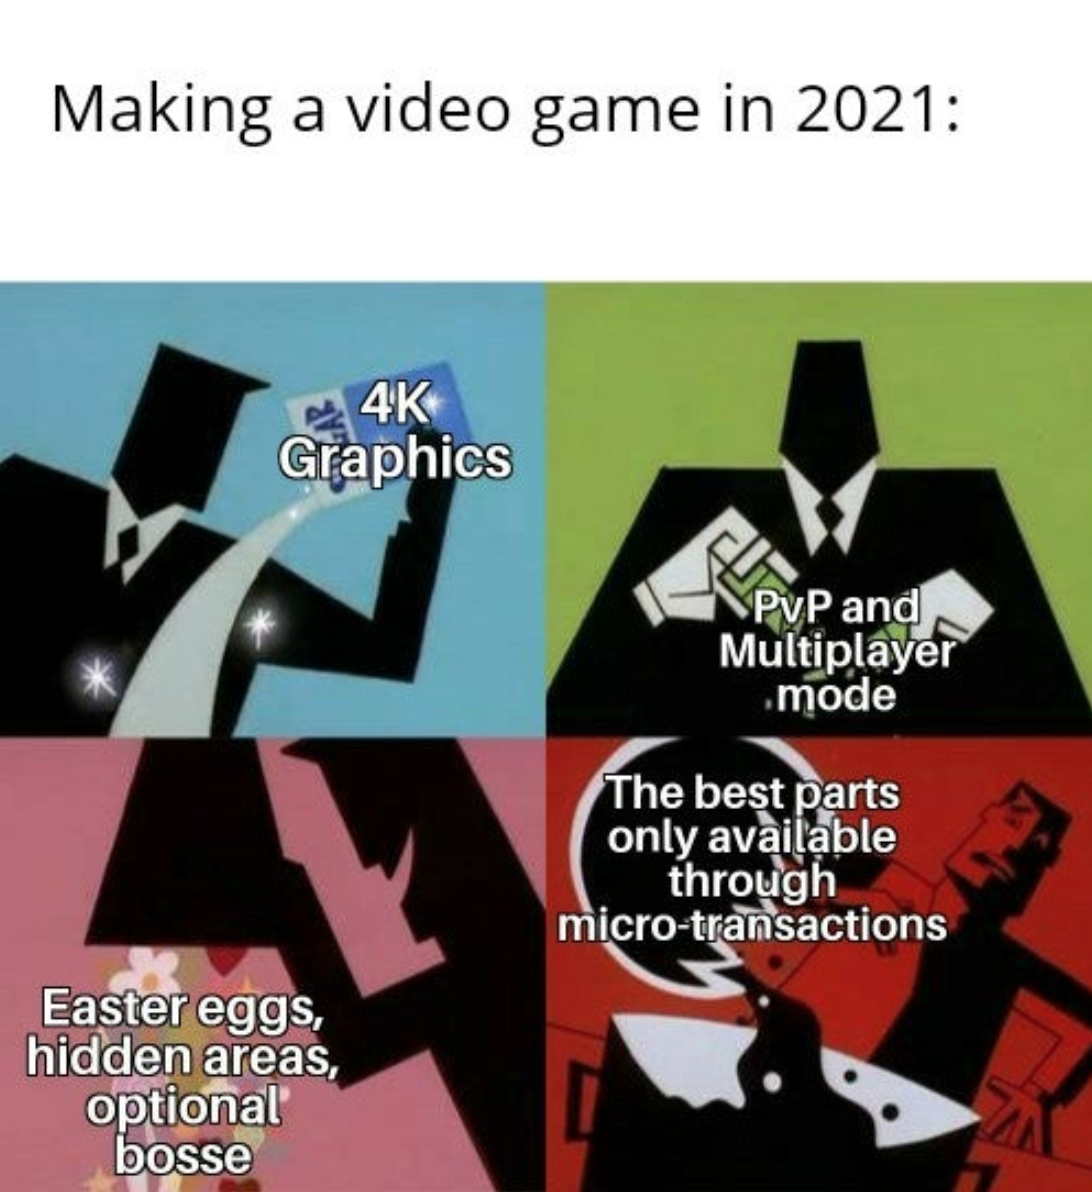 funny gaming memes and pics - powerpuff girl meme template - Making a video game in 2021 4K Graphics PvP and Multiplayer mode The best parts only available through microtransactions Easter eggs, hidden areas, optional bosse